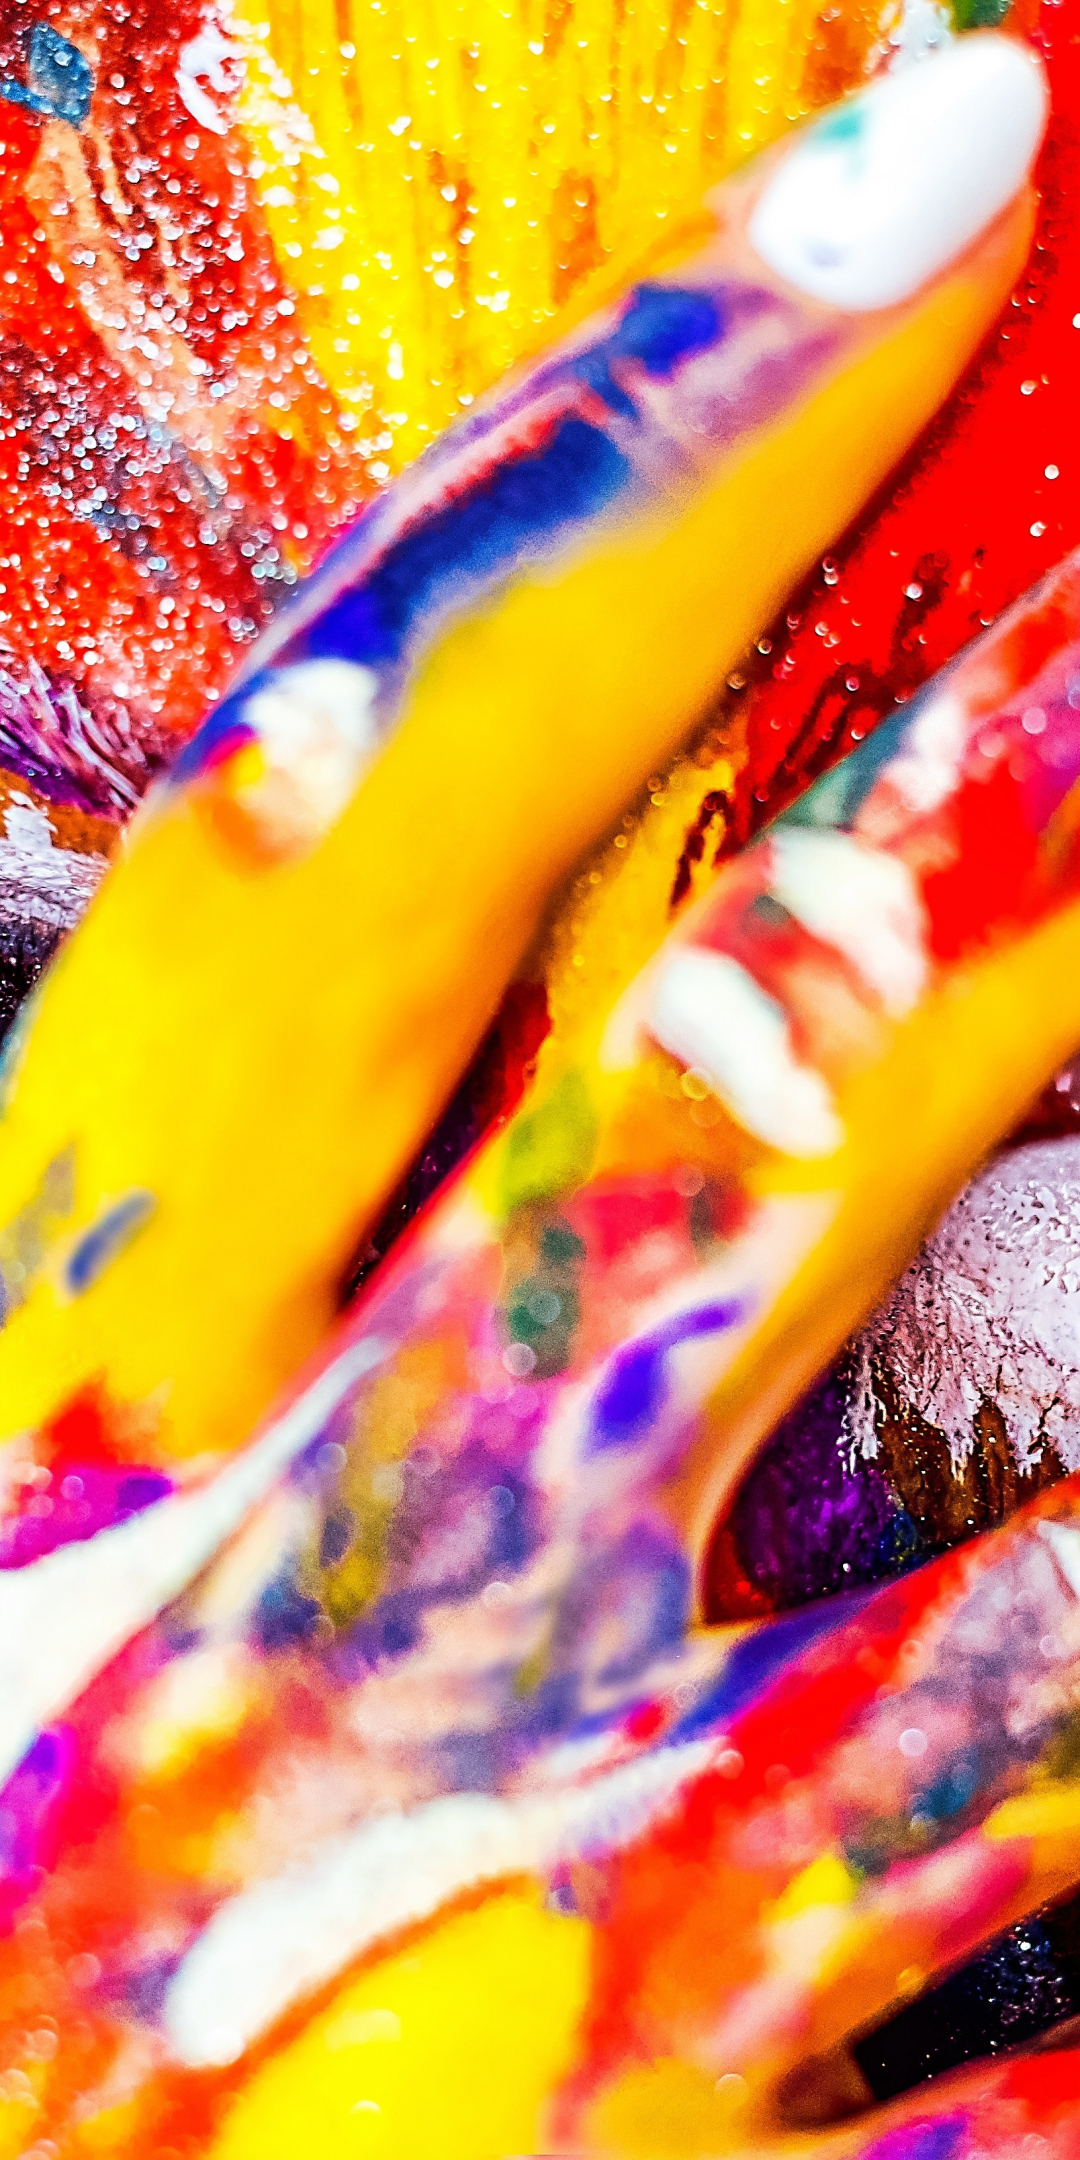 Paint on face and hand, colorful, close up, 1080x2160 wallpaper